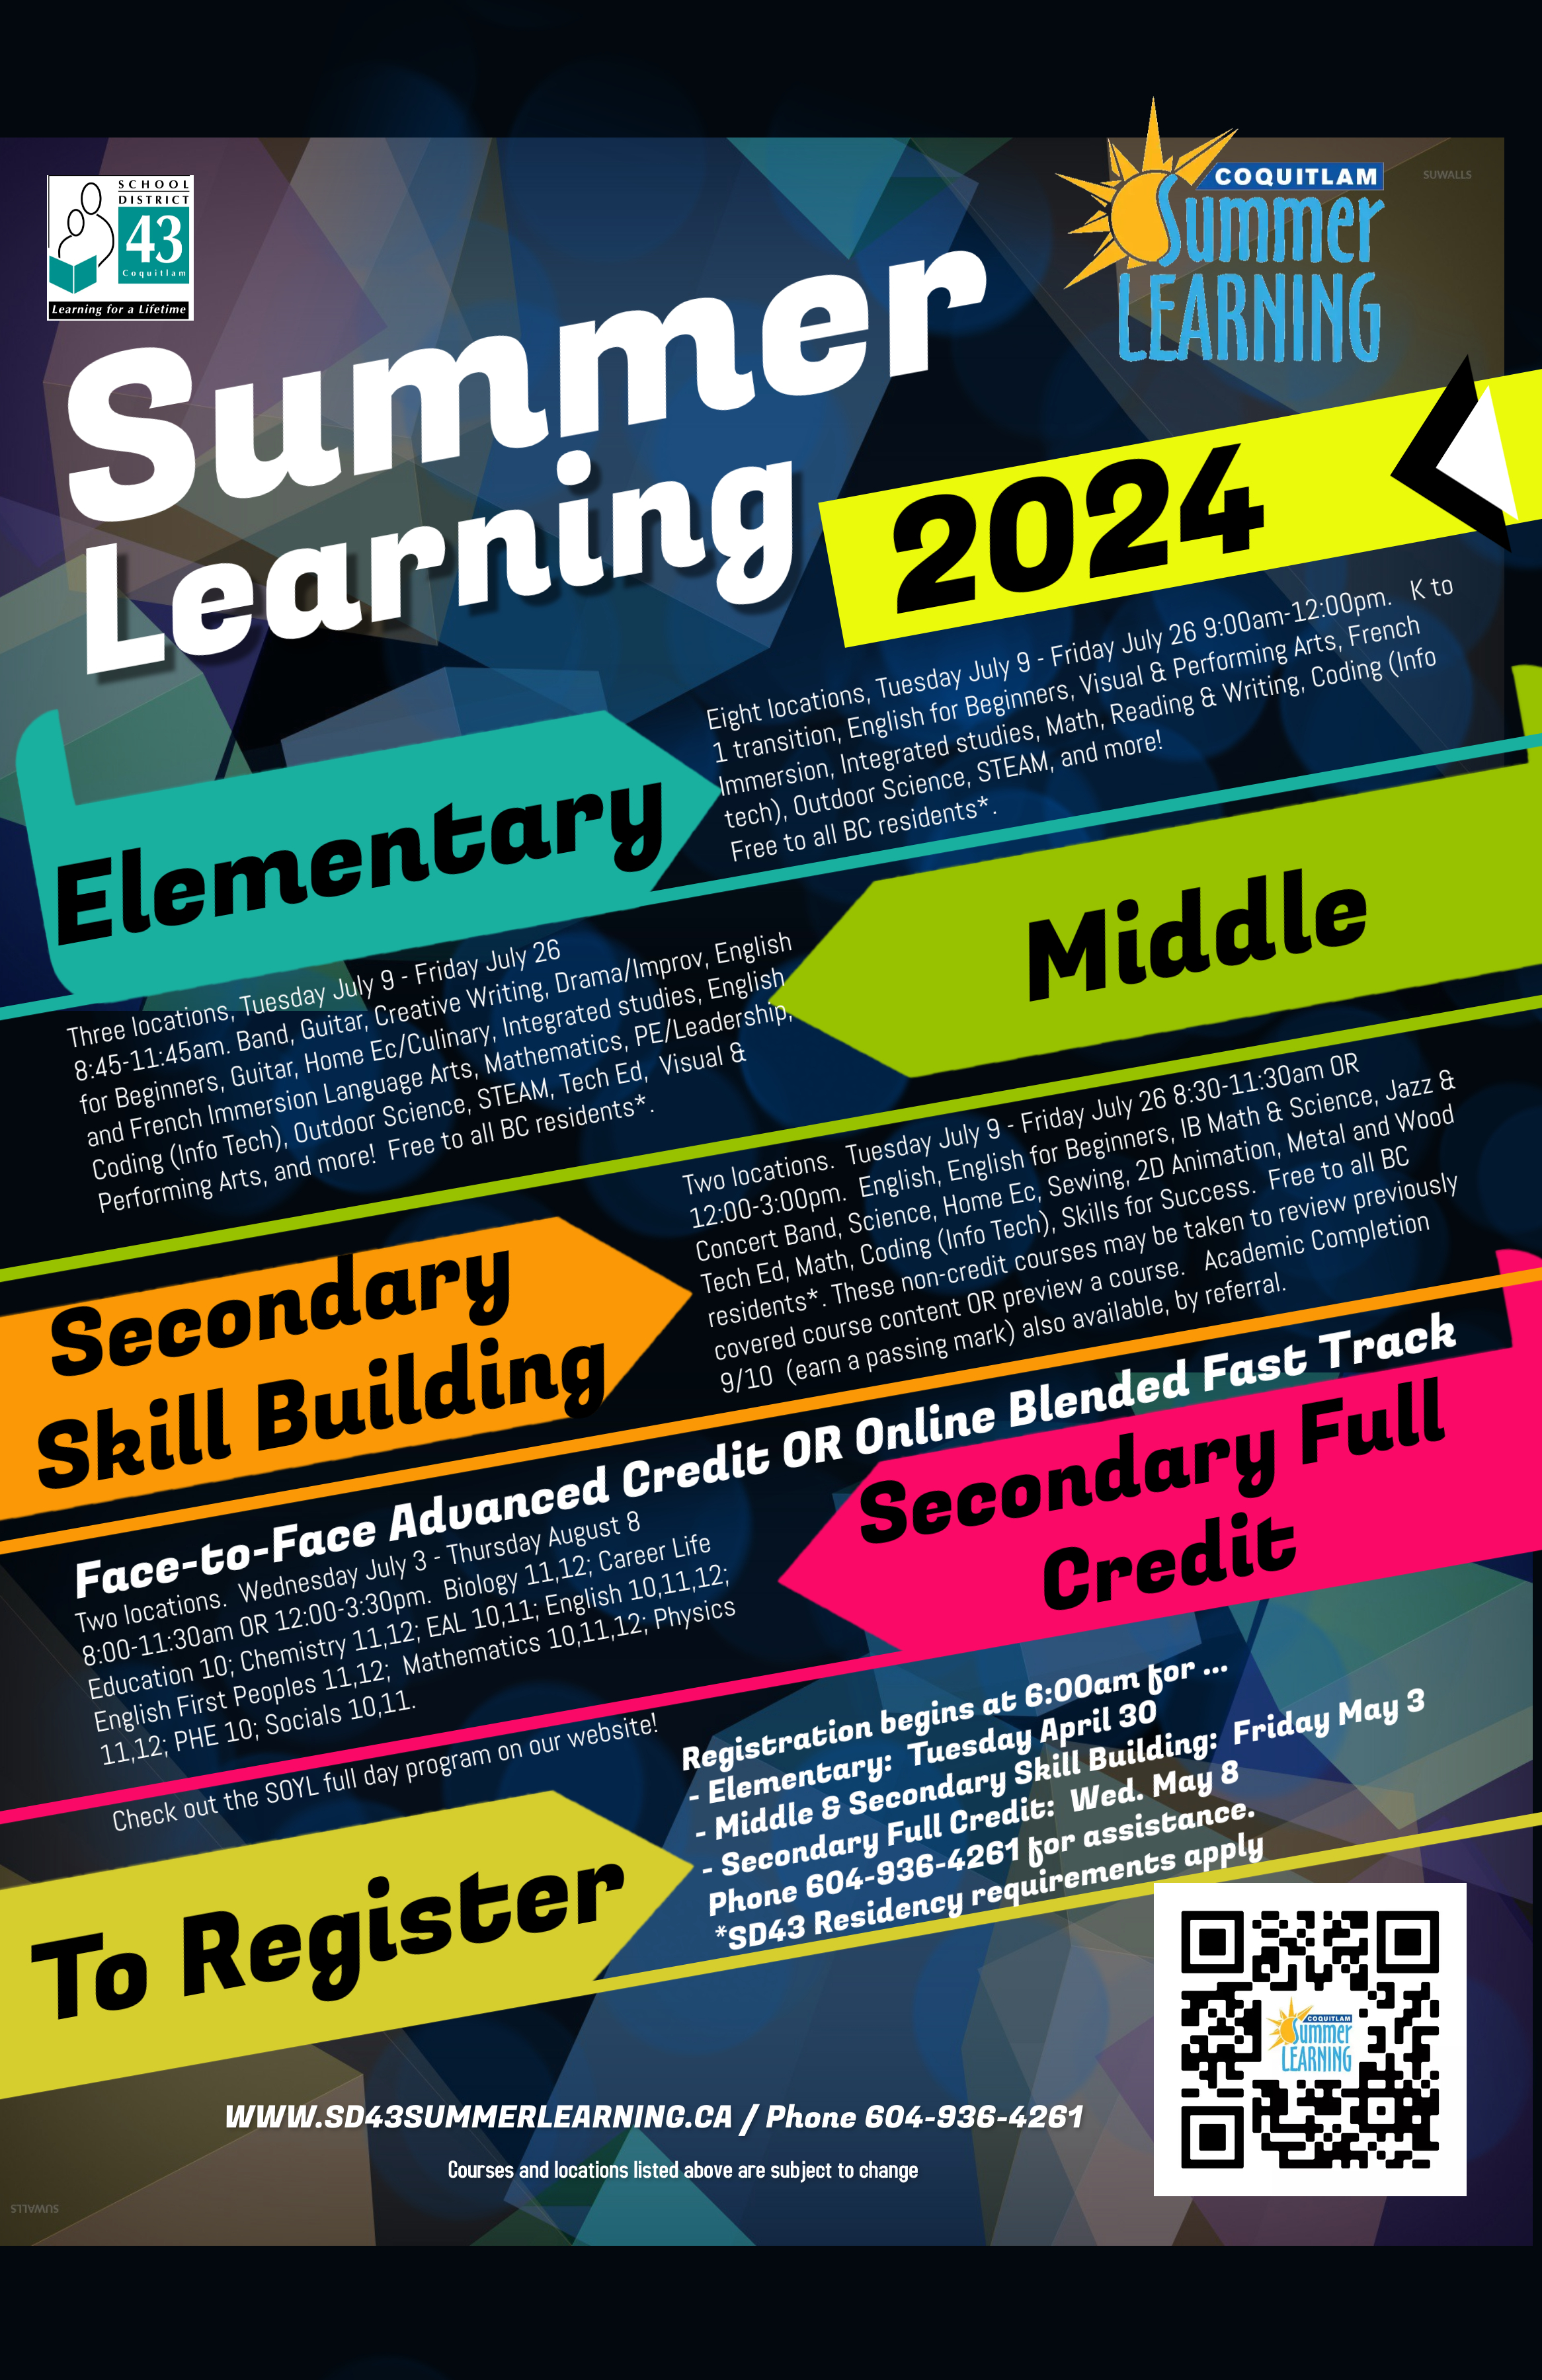 Summer Learning 2024 Poster 11x17